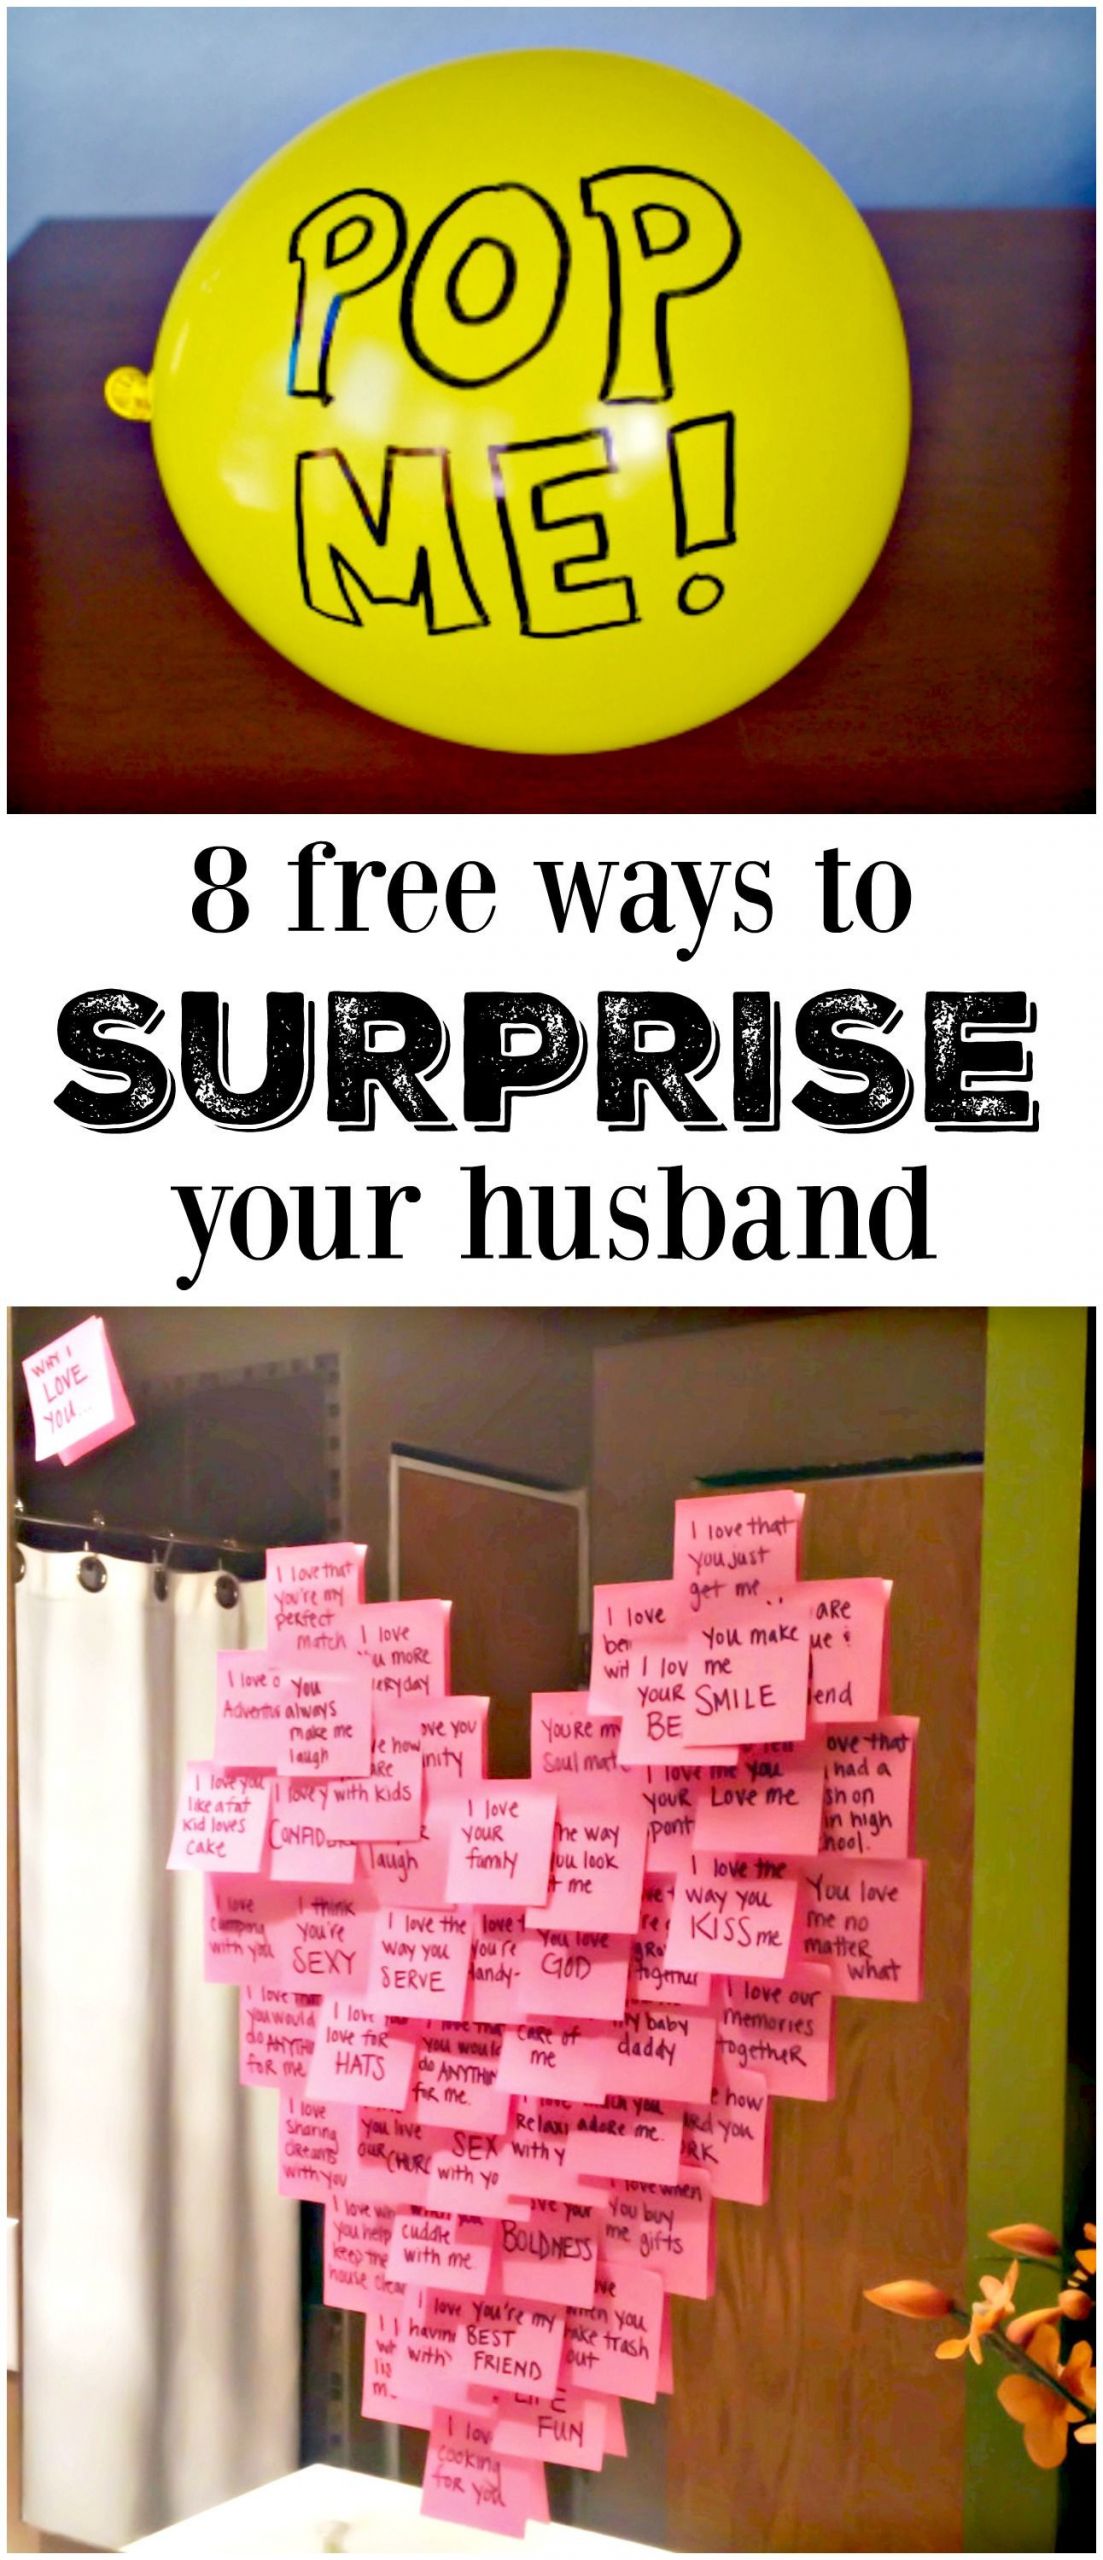 Valentine Gift Ideas For Your Husband
 8 Meaningful Ways to Make His Day